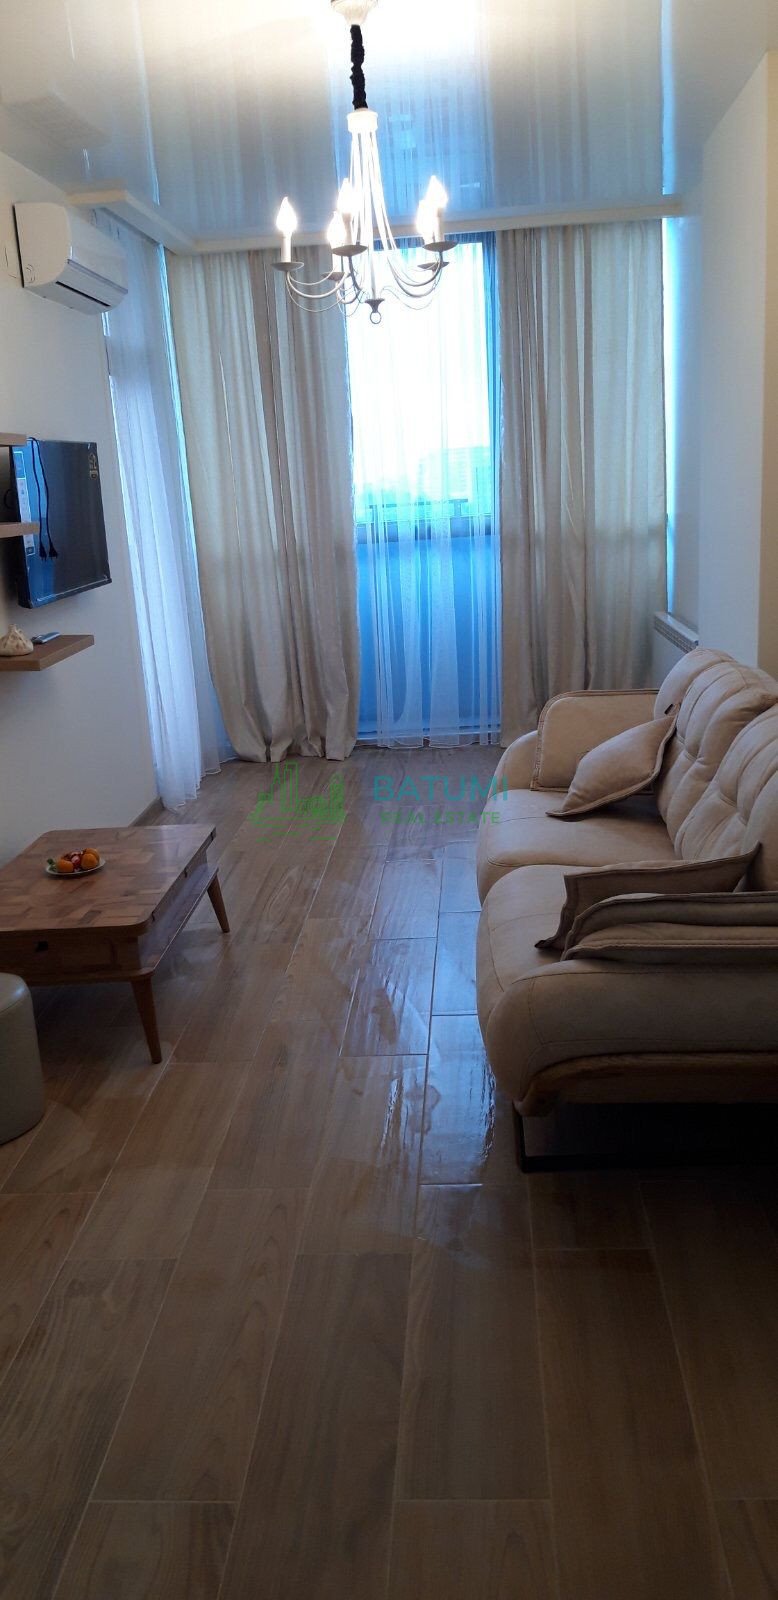 For rent at Zh.Shartava street 32 2-room apartment with central heating